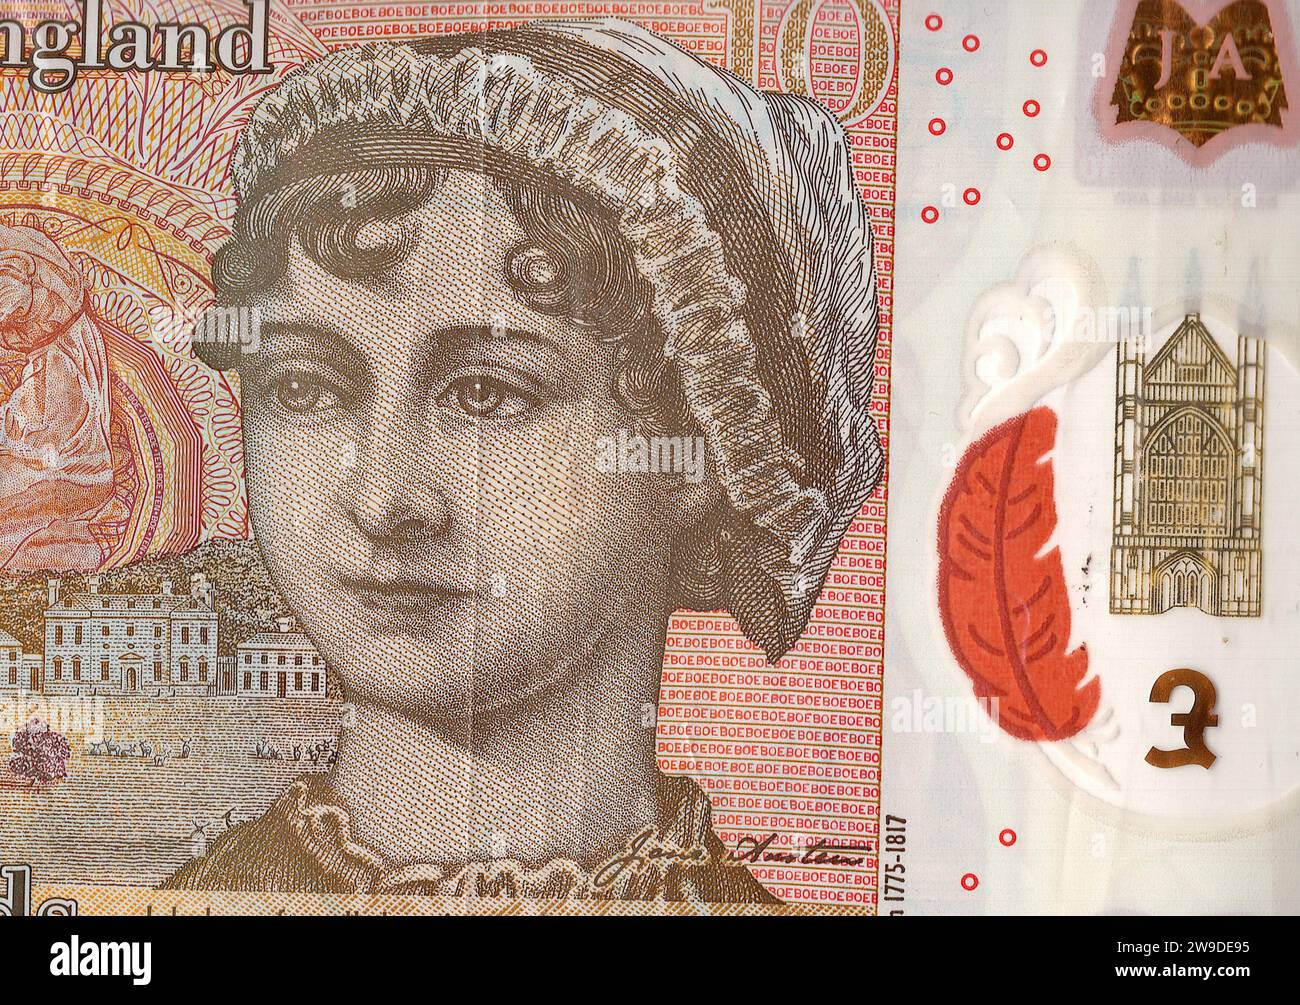 Close up of a ten pound note featuring a portrait of Jane Austen from the United Kingdom/Great Britain on a white background. Stock Photo